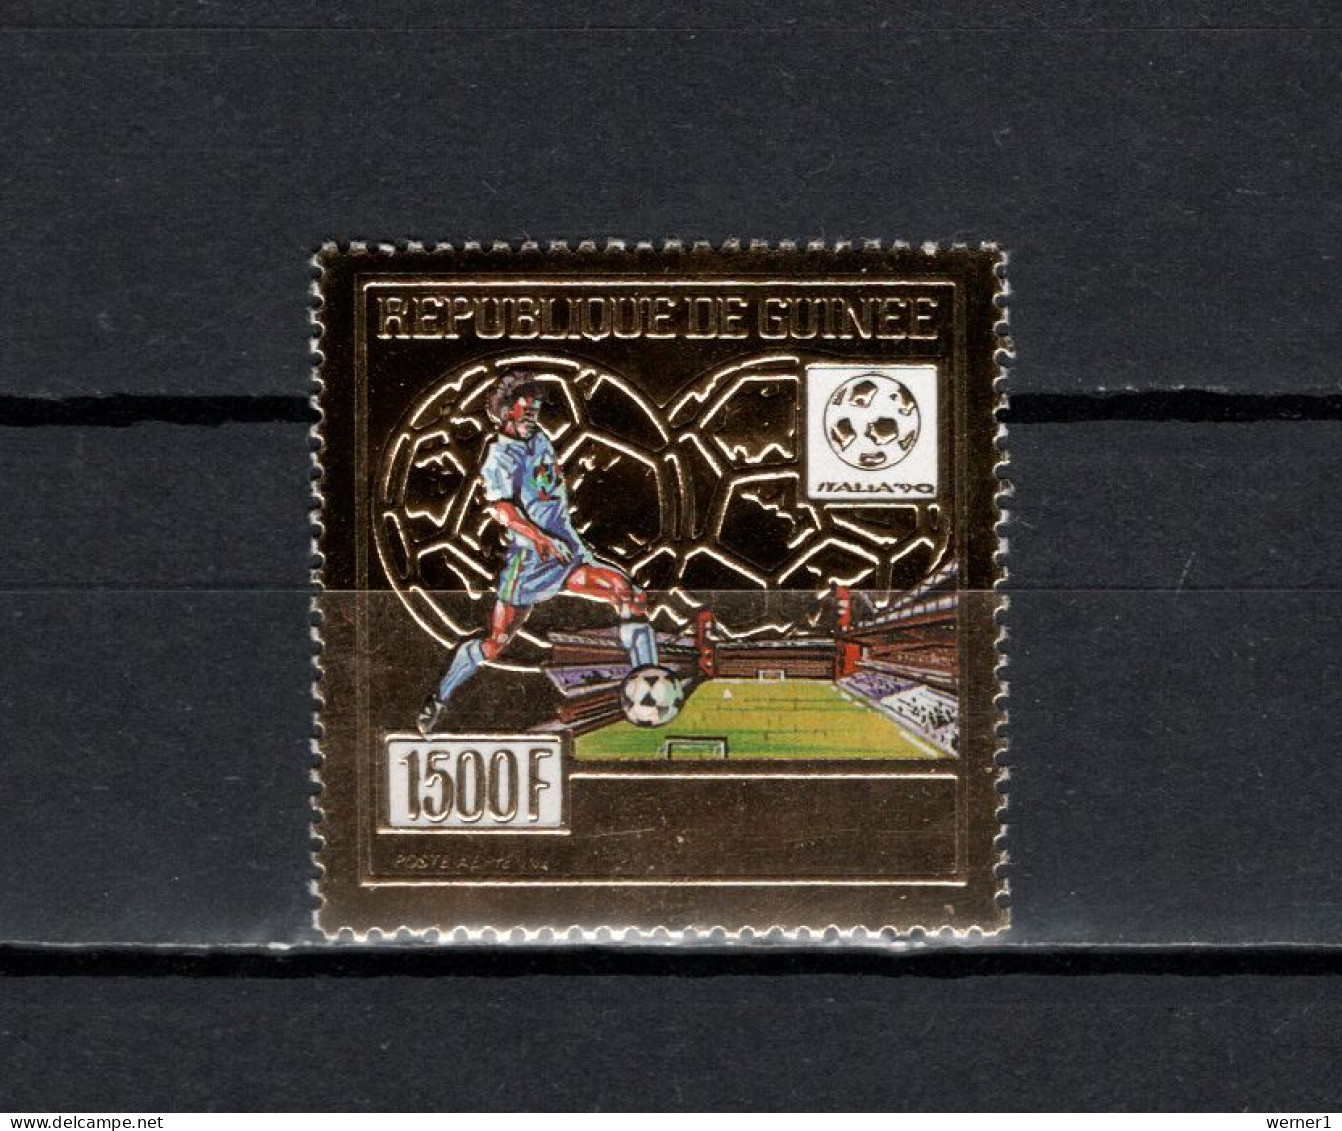 Guinea 1990 Football Soccer World Cup Gold Stamp MNH - 1990 – Italy